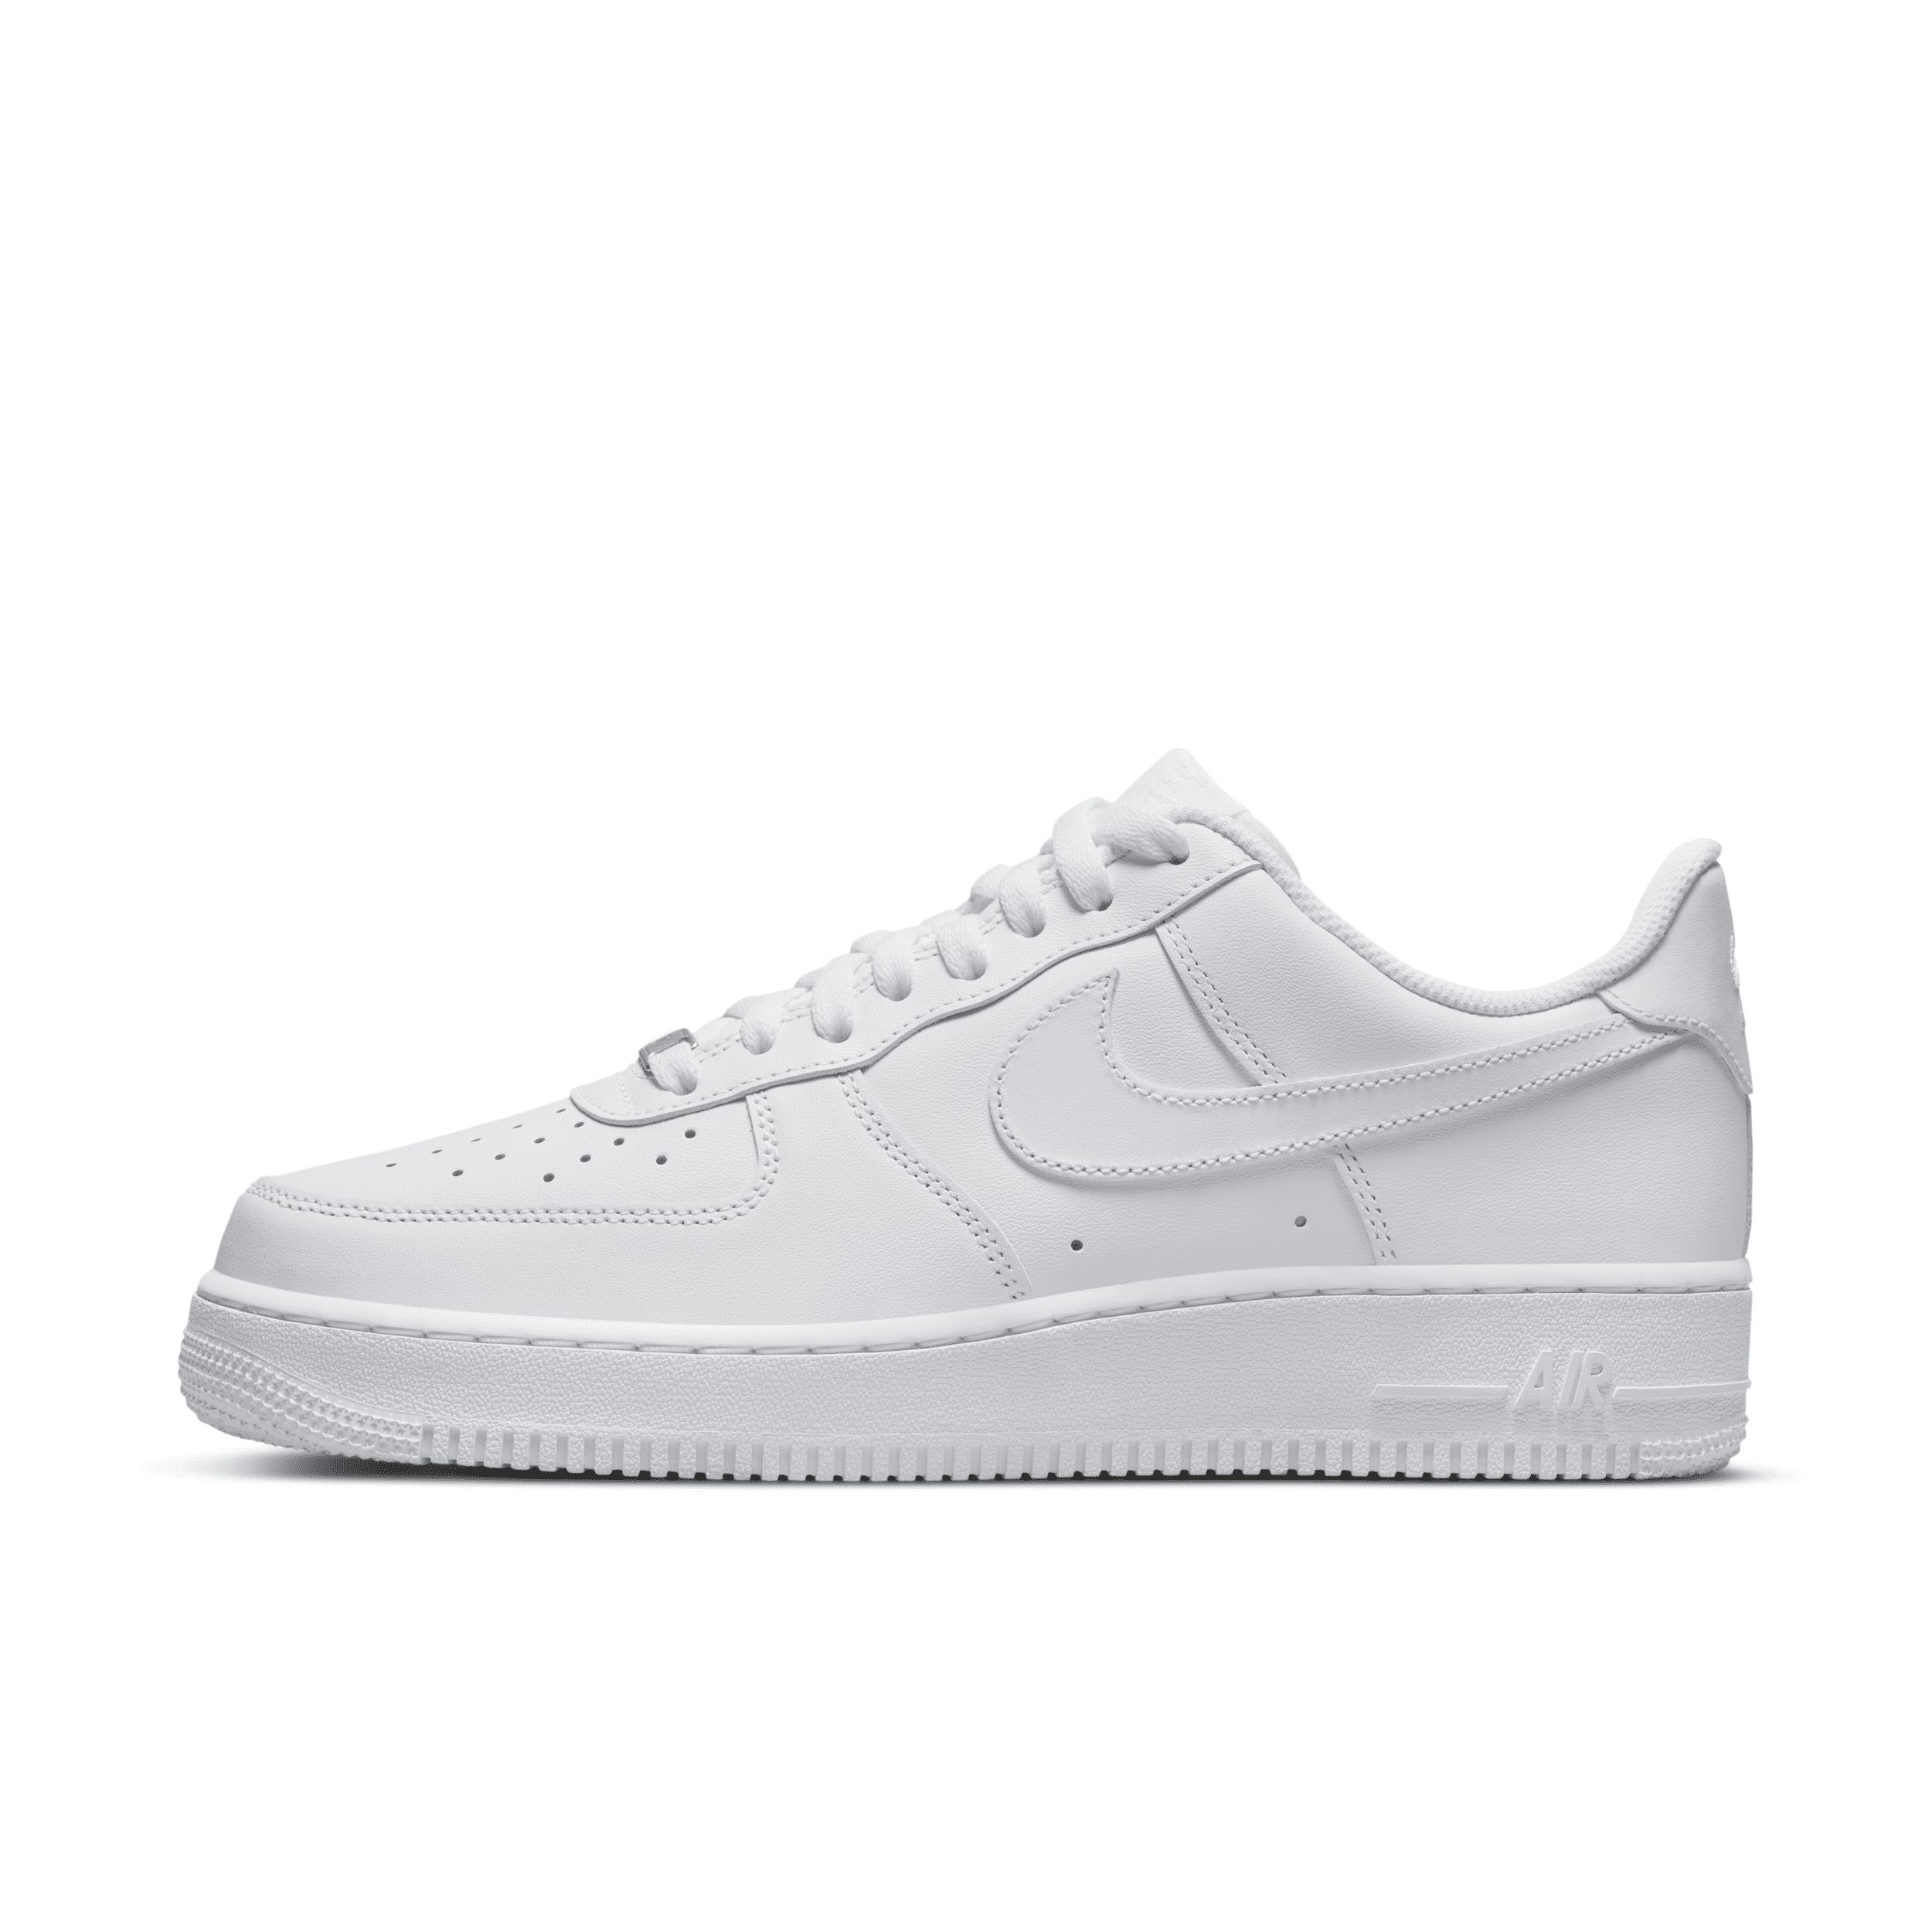 Nike Men's Air Force 1 '07 Shoes in White, Size: 6.5 | CW2288-111 | Nike (US)